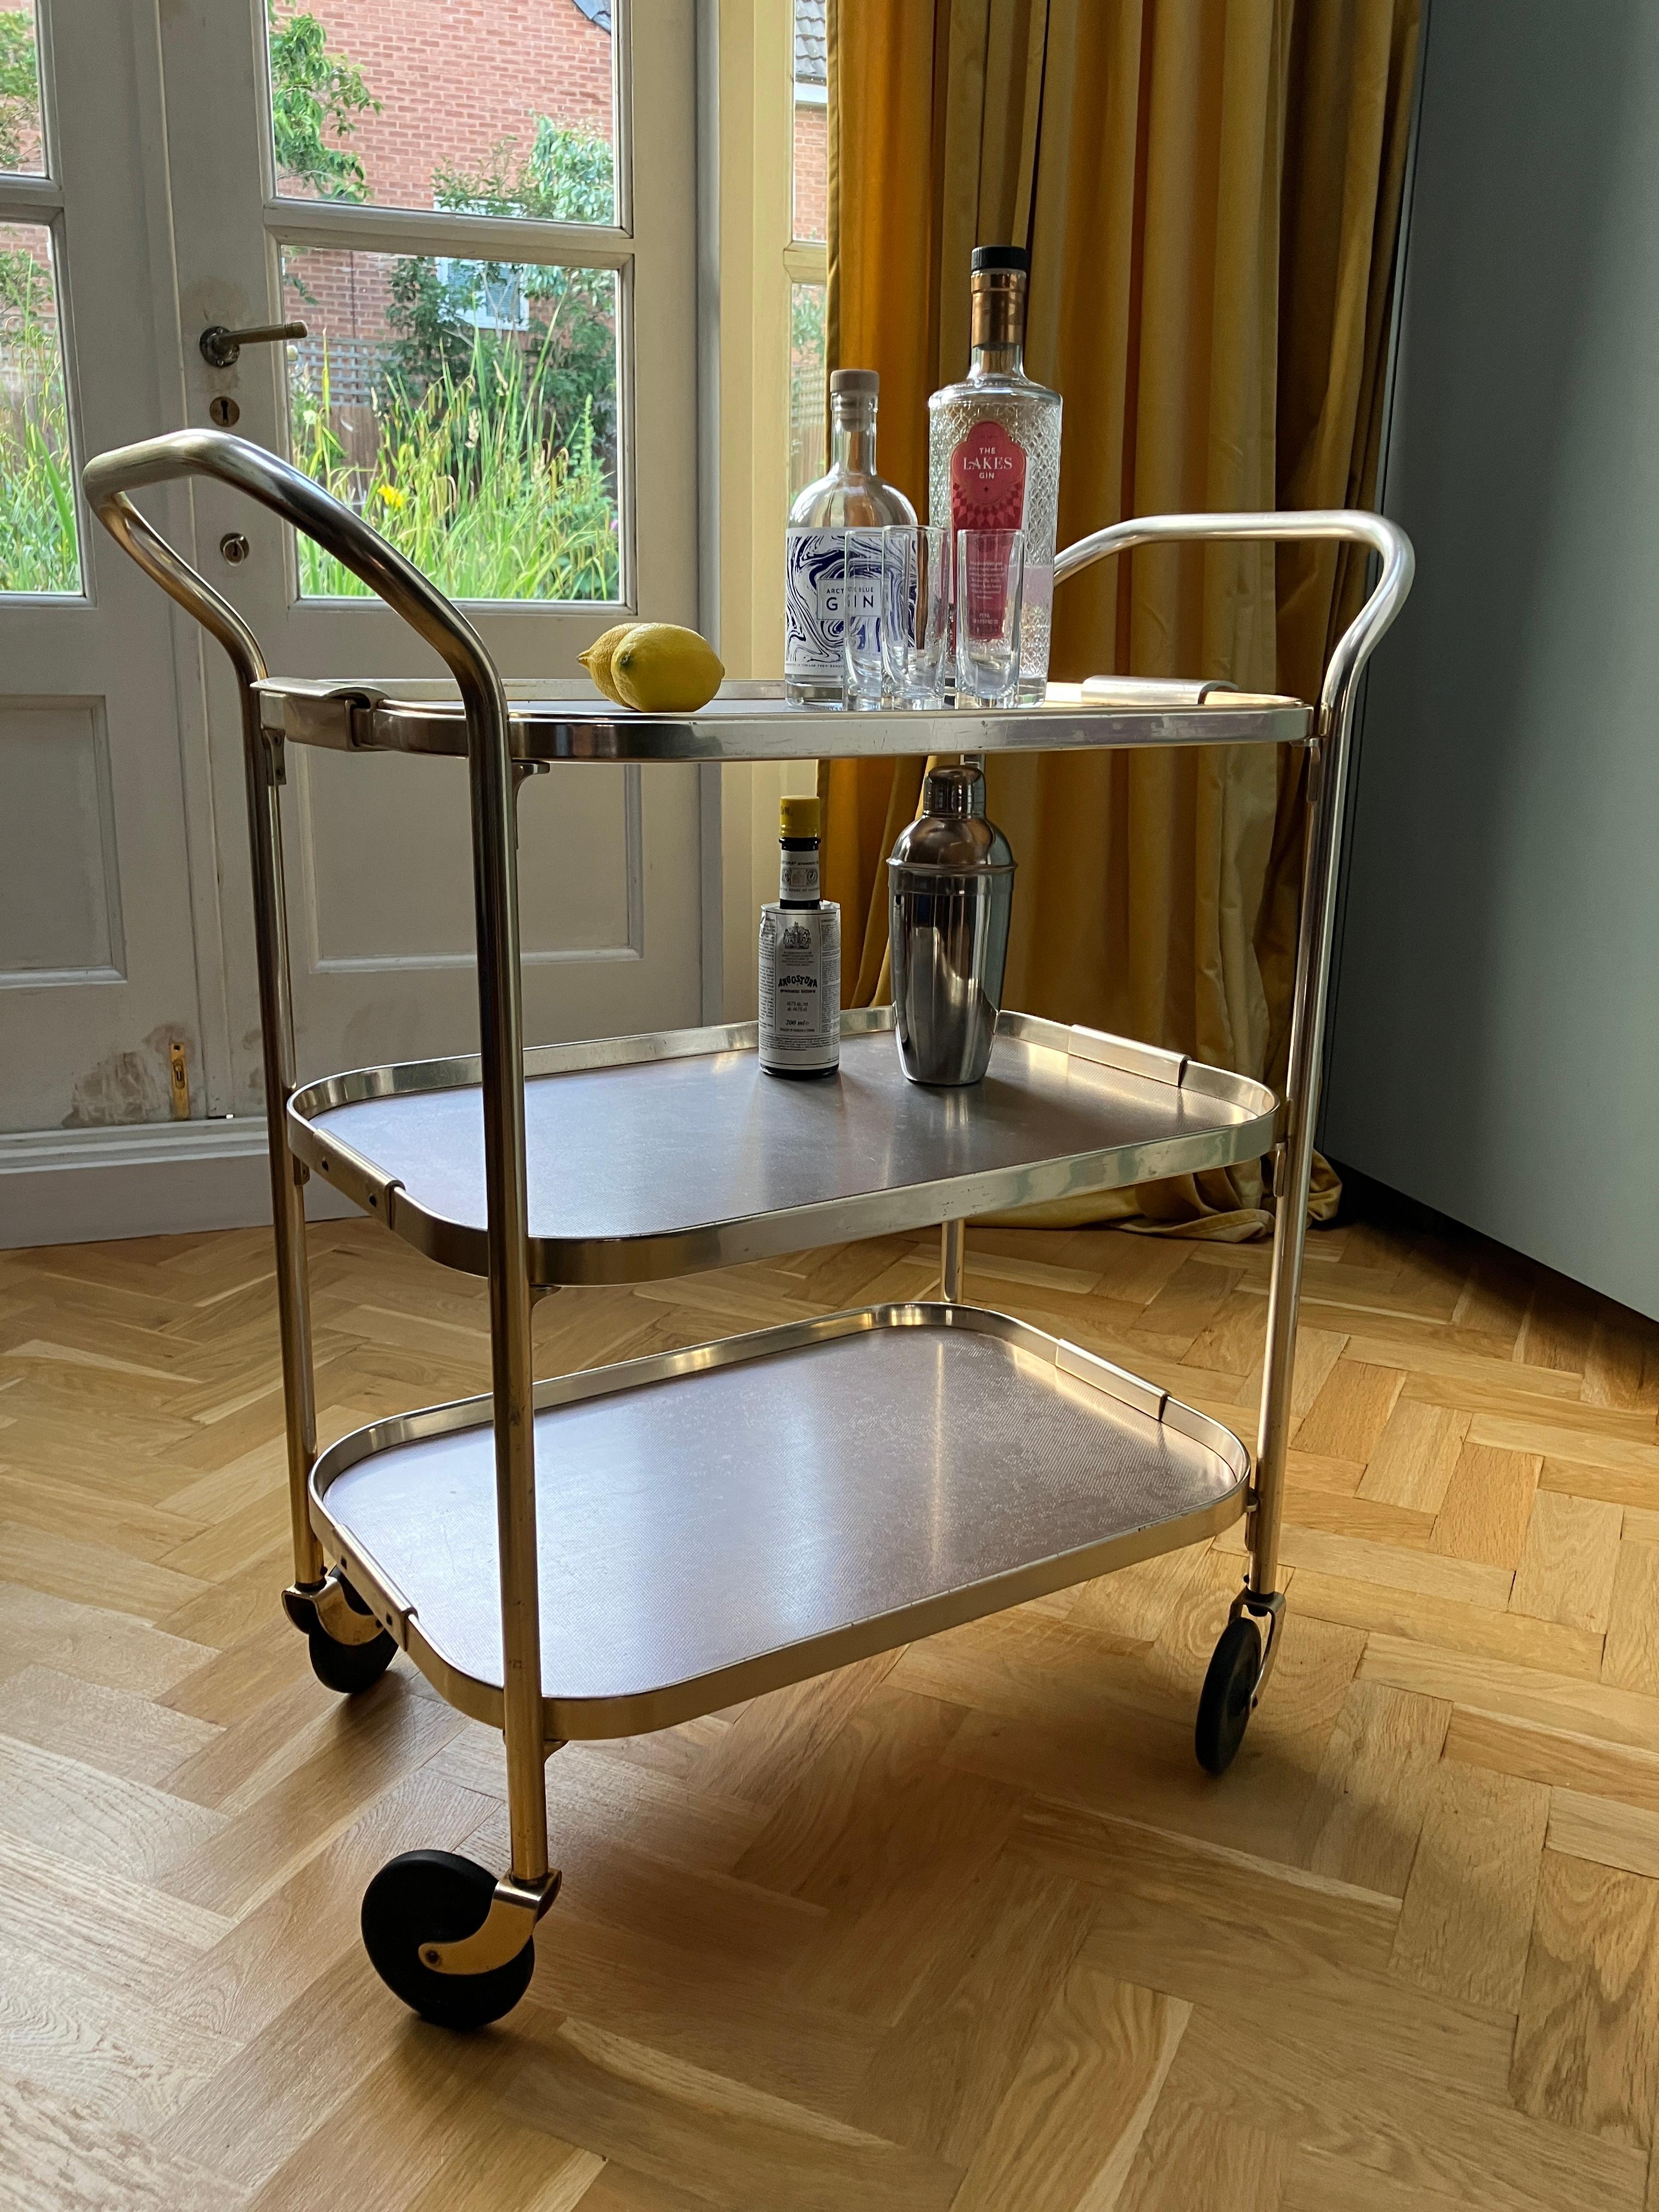 A very nice vintage serving trolley with three tiers. The top tray is separate and can be used as a serving tray. 

The drinks trolley is made of aluminium, and has a luxurious ionized rose gold colour finish. The trolley has attractive black